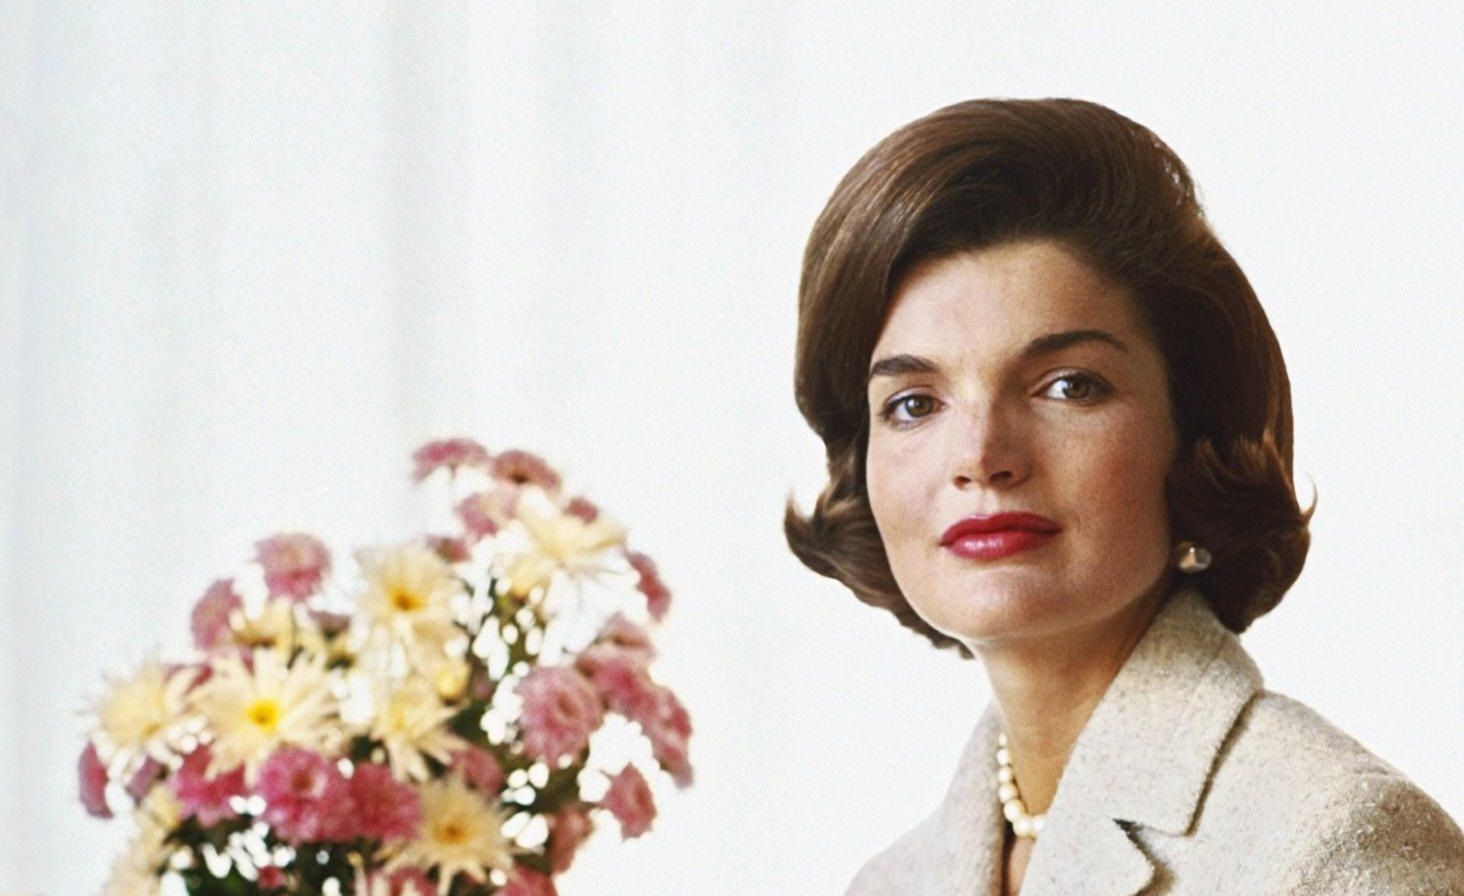 JACQUELINE KENNEDY FIRST LADY 01 June 1955